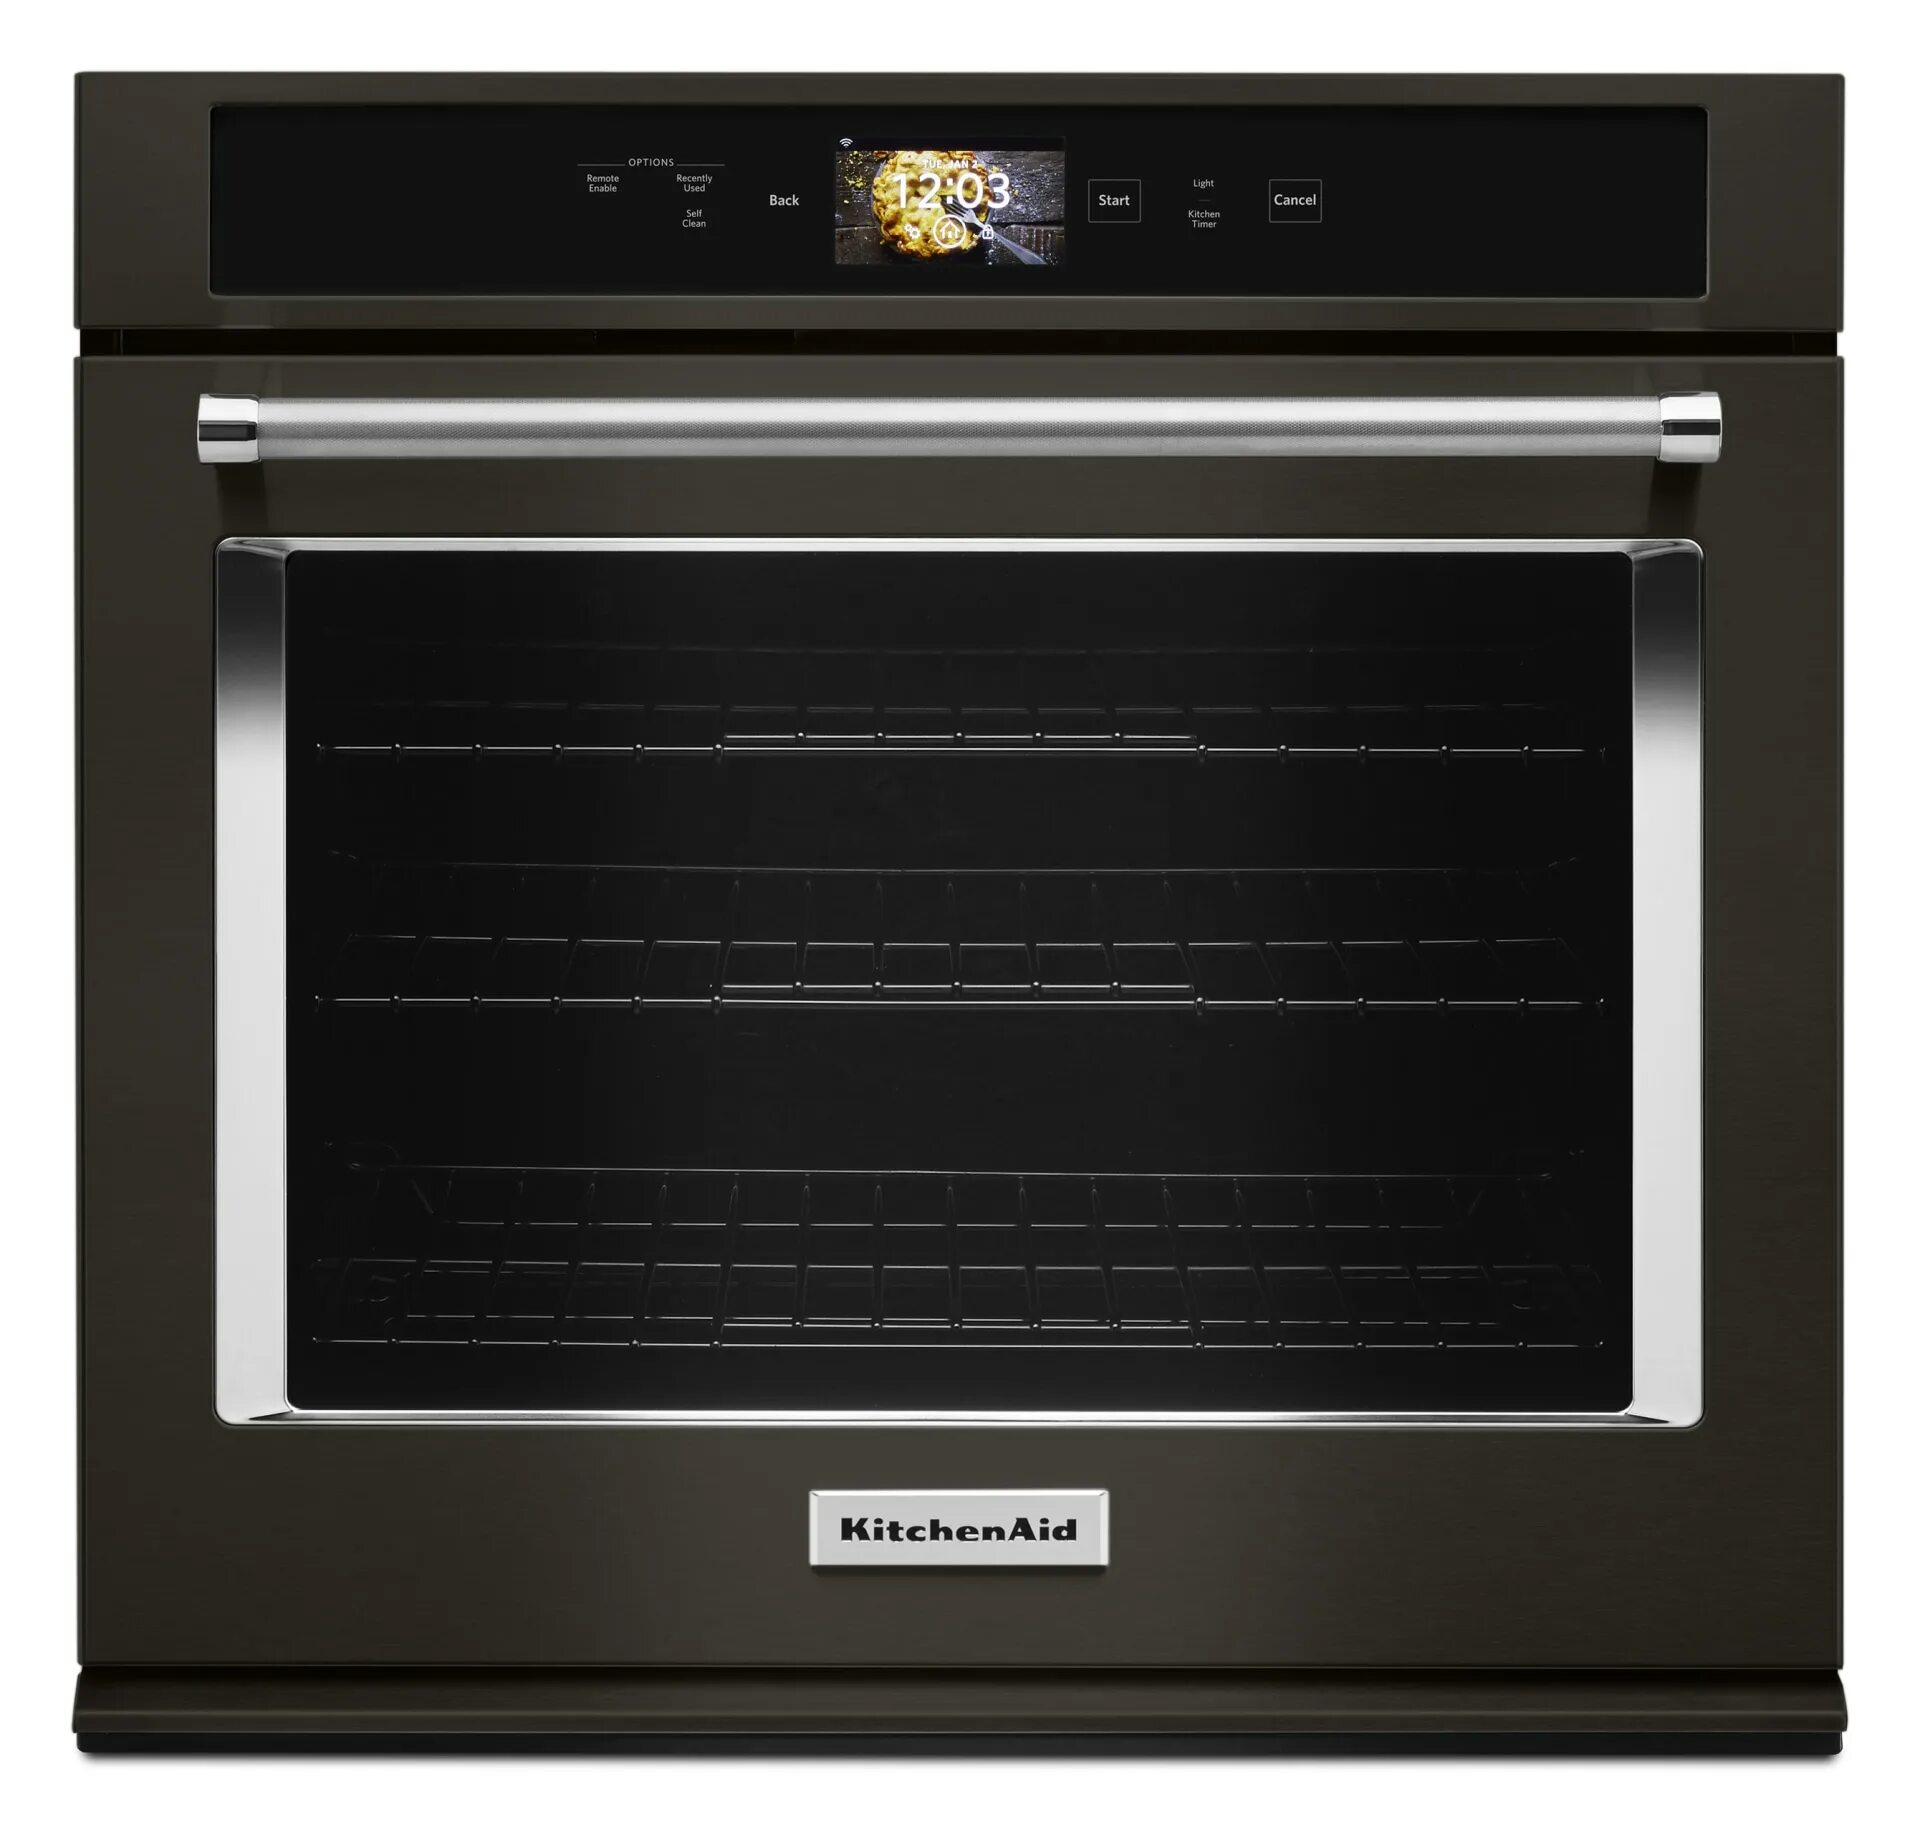 Стандартные духовые шкафы. Oven Black. Wall Oven. Heating Oven Stainless Steel. Built-in Convection Speed Oven.